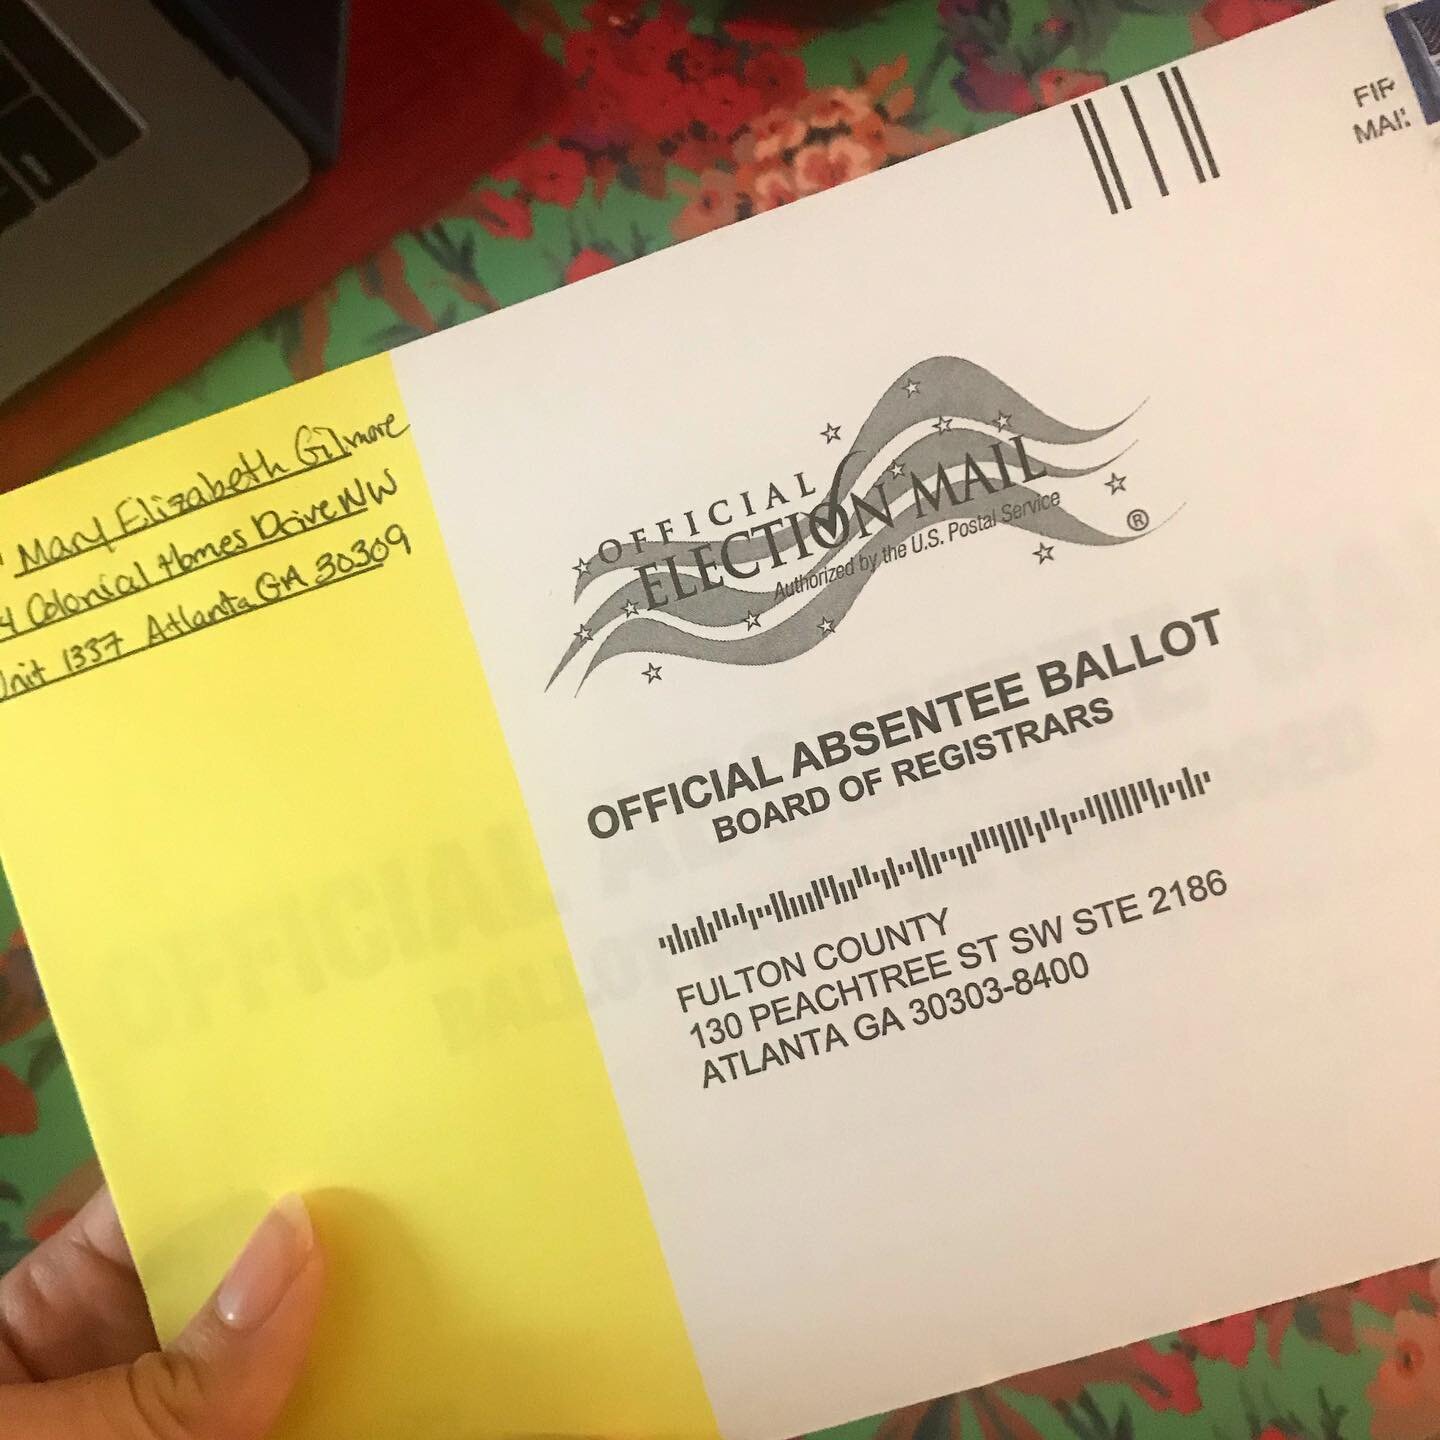 Dropped off at a ballot box today!🗳
.
.
.
#vote #vote2020 #votebymail